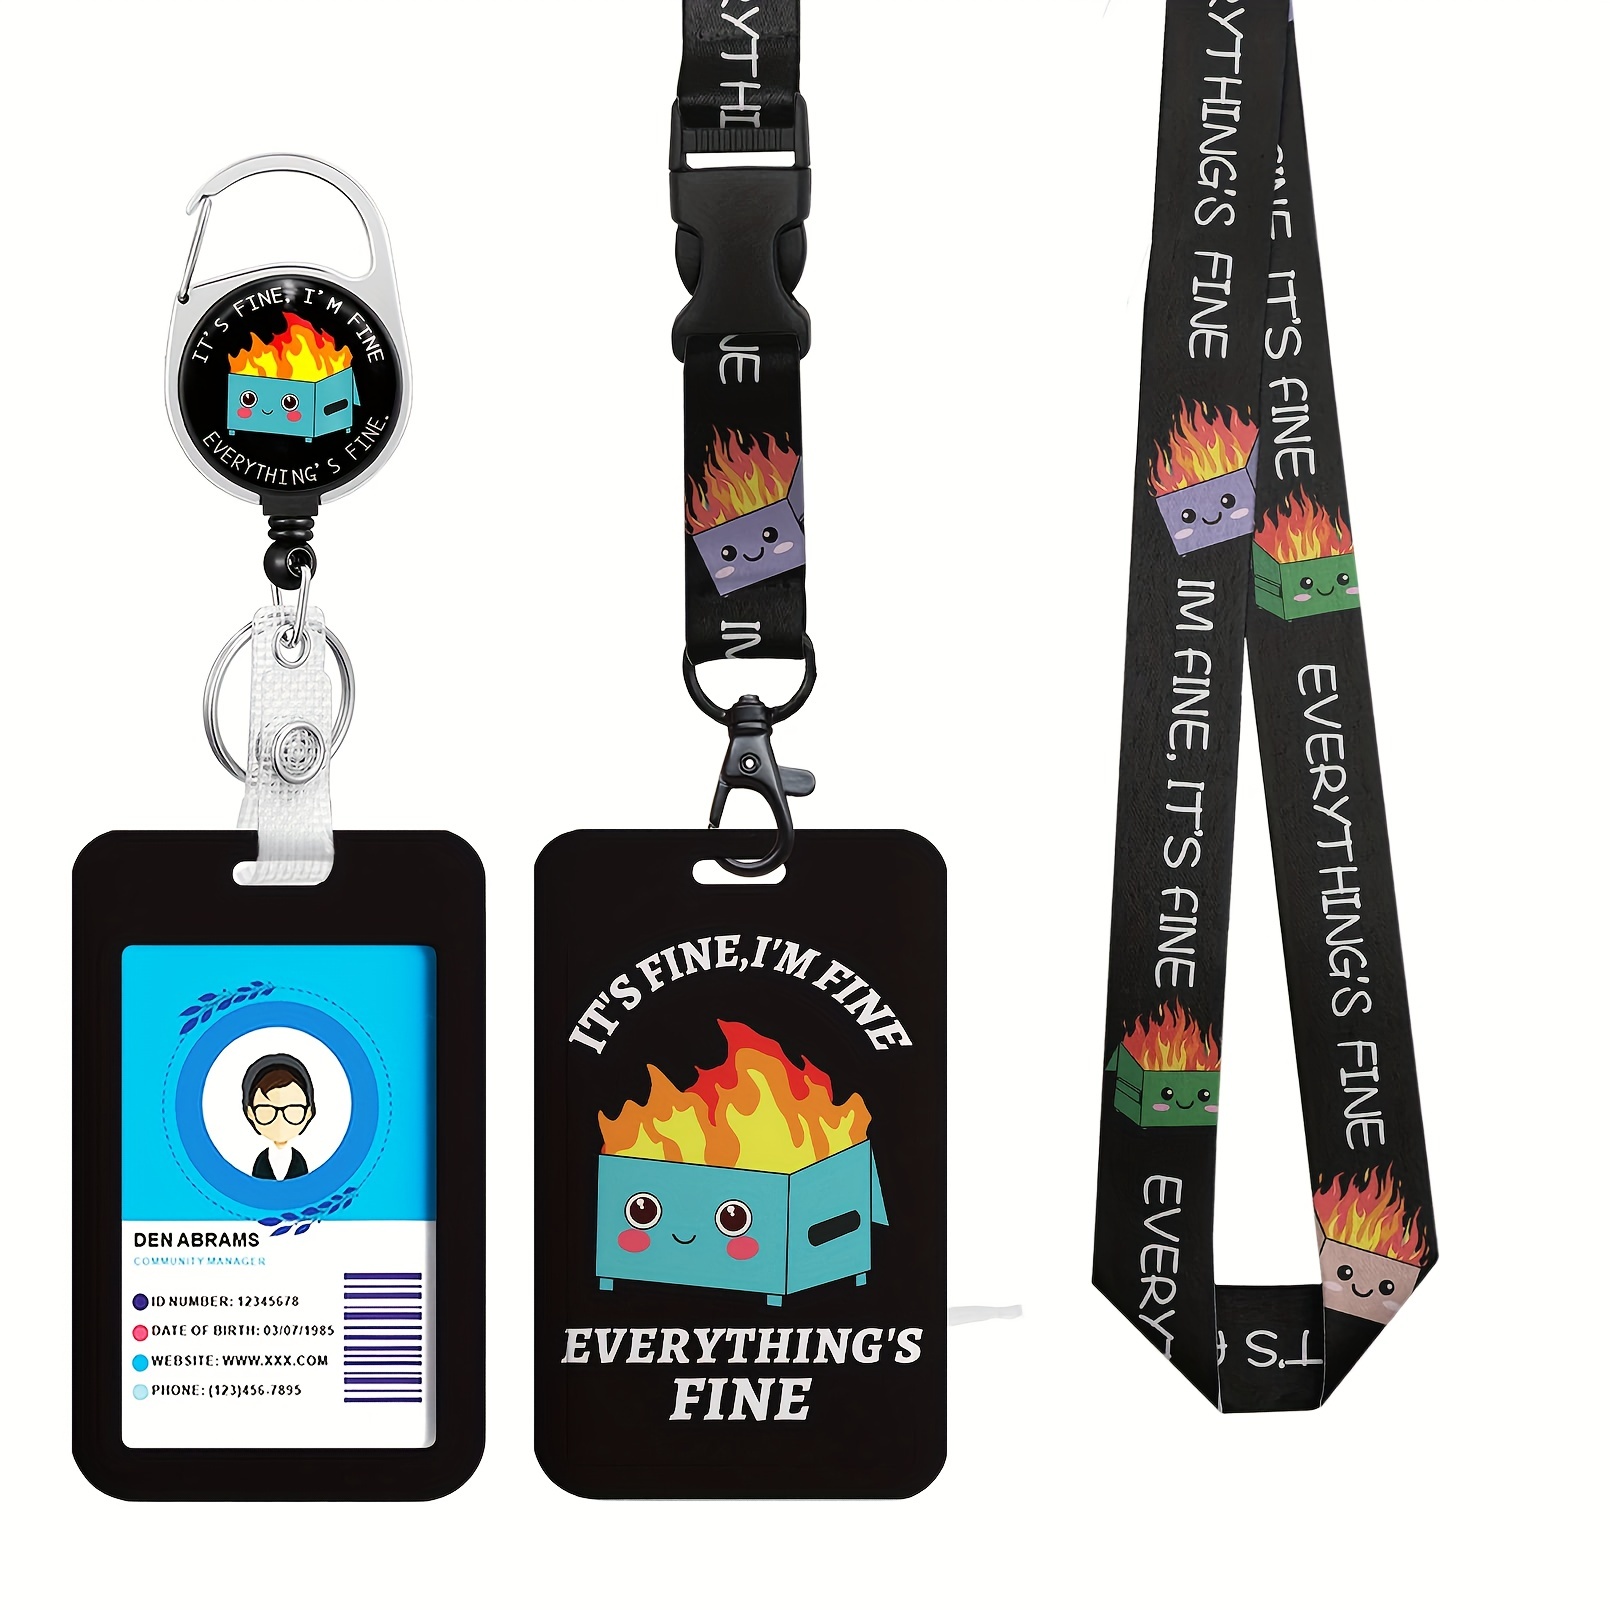 Cute Lanyard id Holder Durable Retractable Lanyards for ID Badges